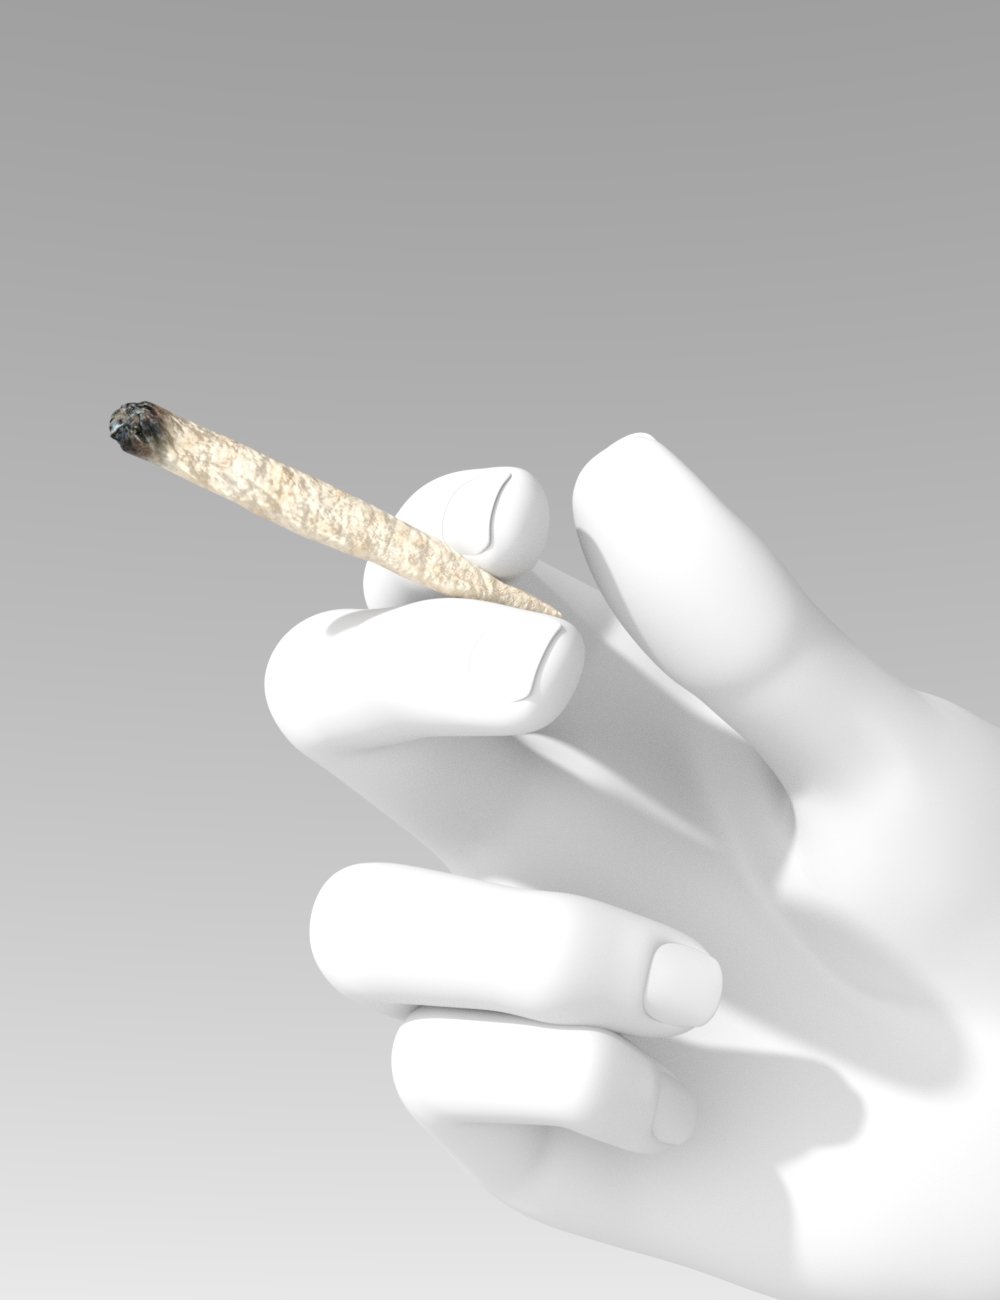 Smoking Paraphernalia - Joint for Genesis 8 and 8.1 by: Sixus1 Media, 3D Models by Daz 3D